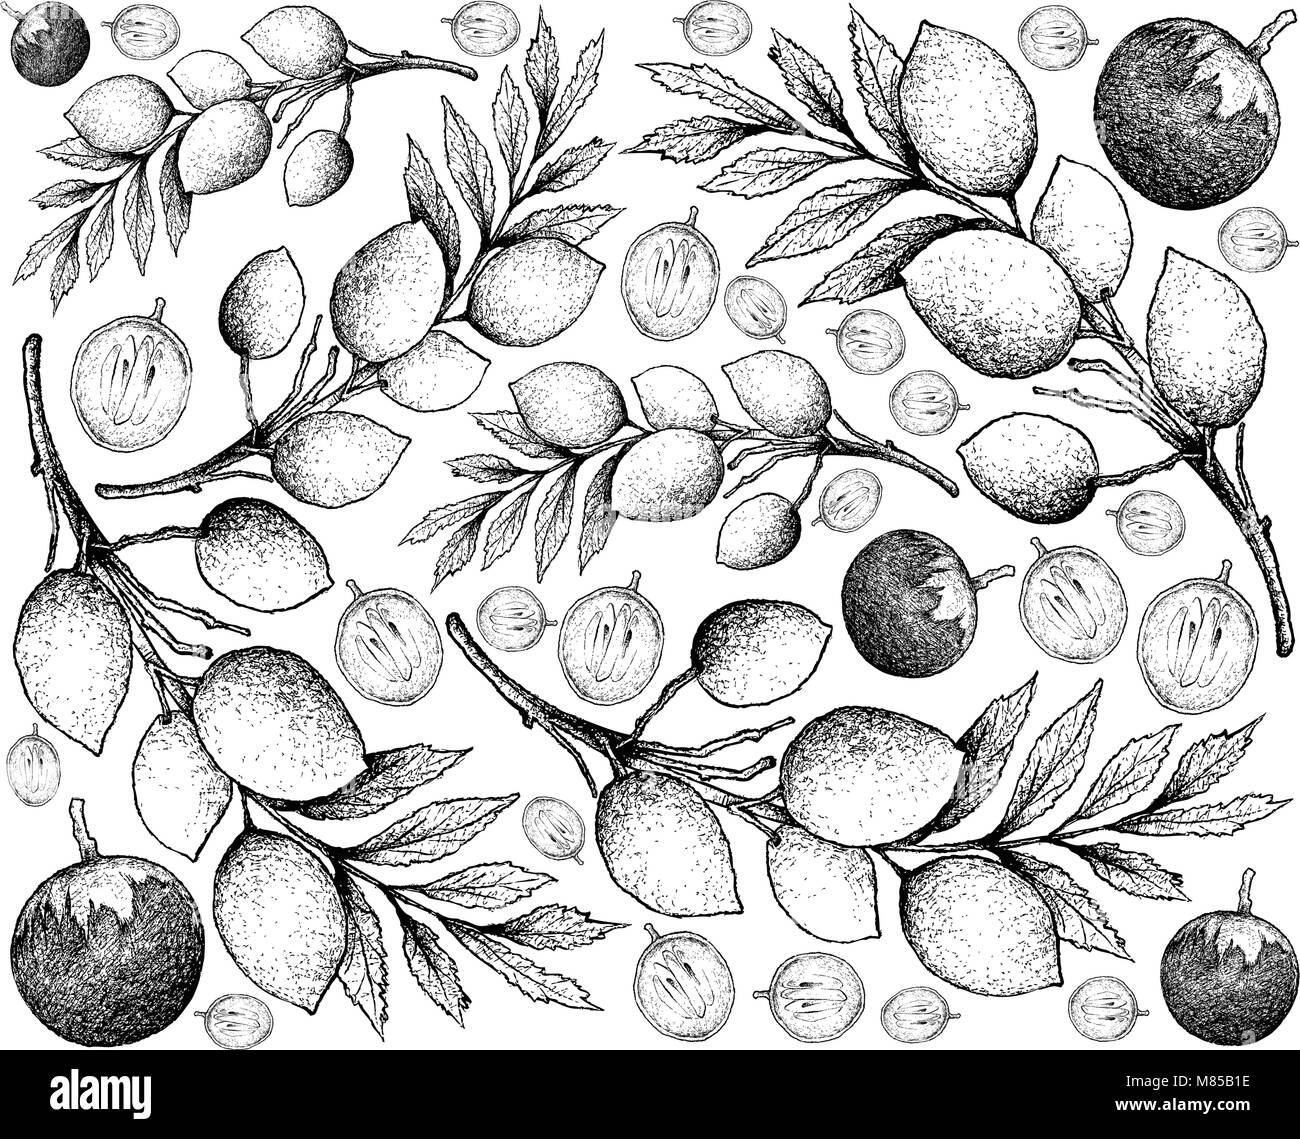 Tropical Fruit, Illustration Wallpaper Background Hand Drawn Sketch of Star Apple or Chrysophyllum Cainito and Elaeocarpus Hygrophilus Fruits. Stock Vector